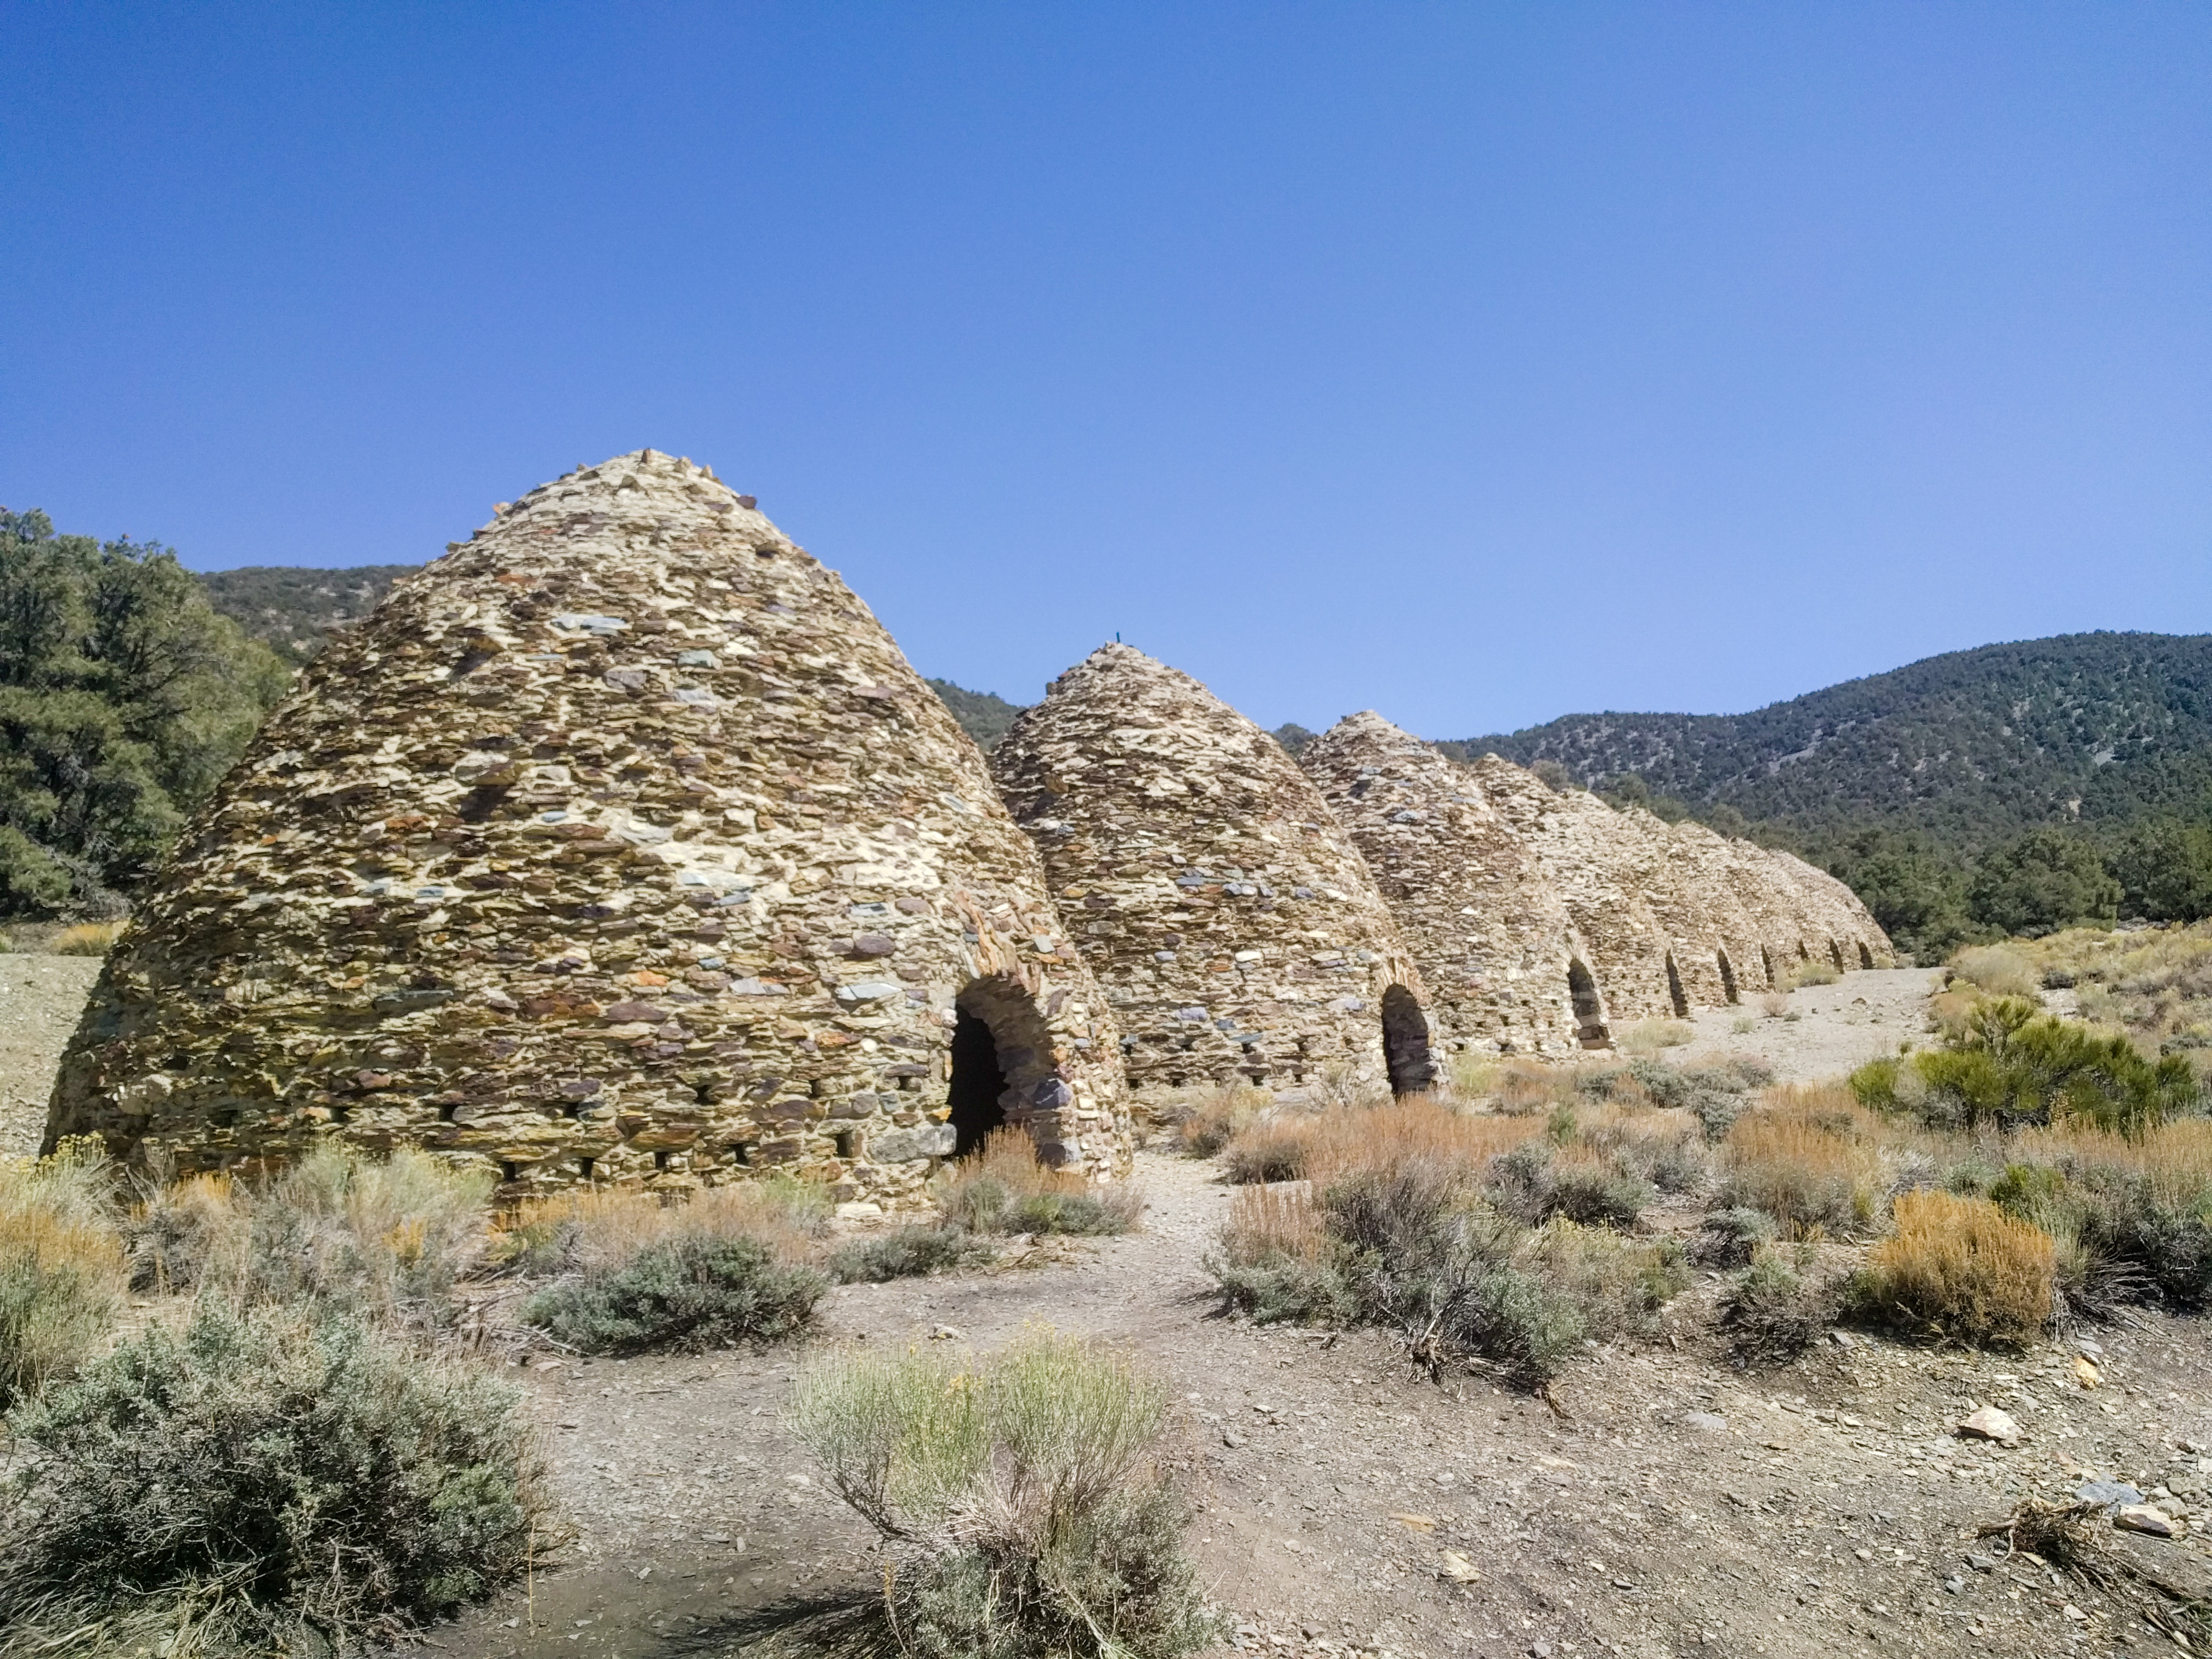 Picture of the Charcoal Kilns